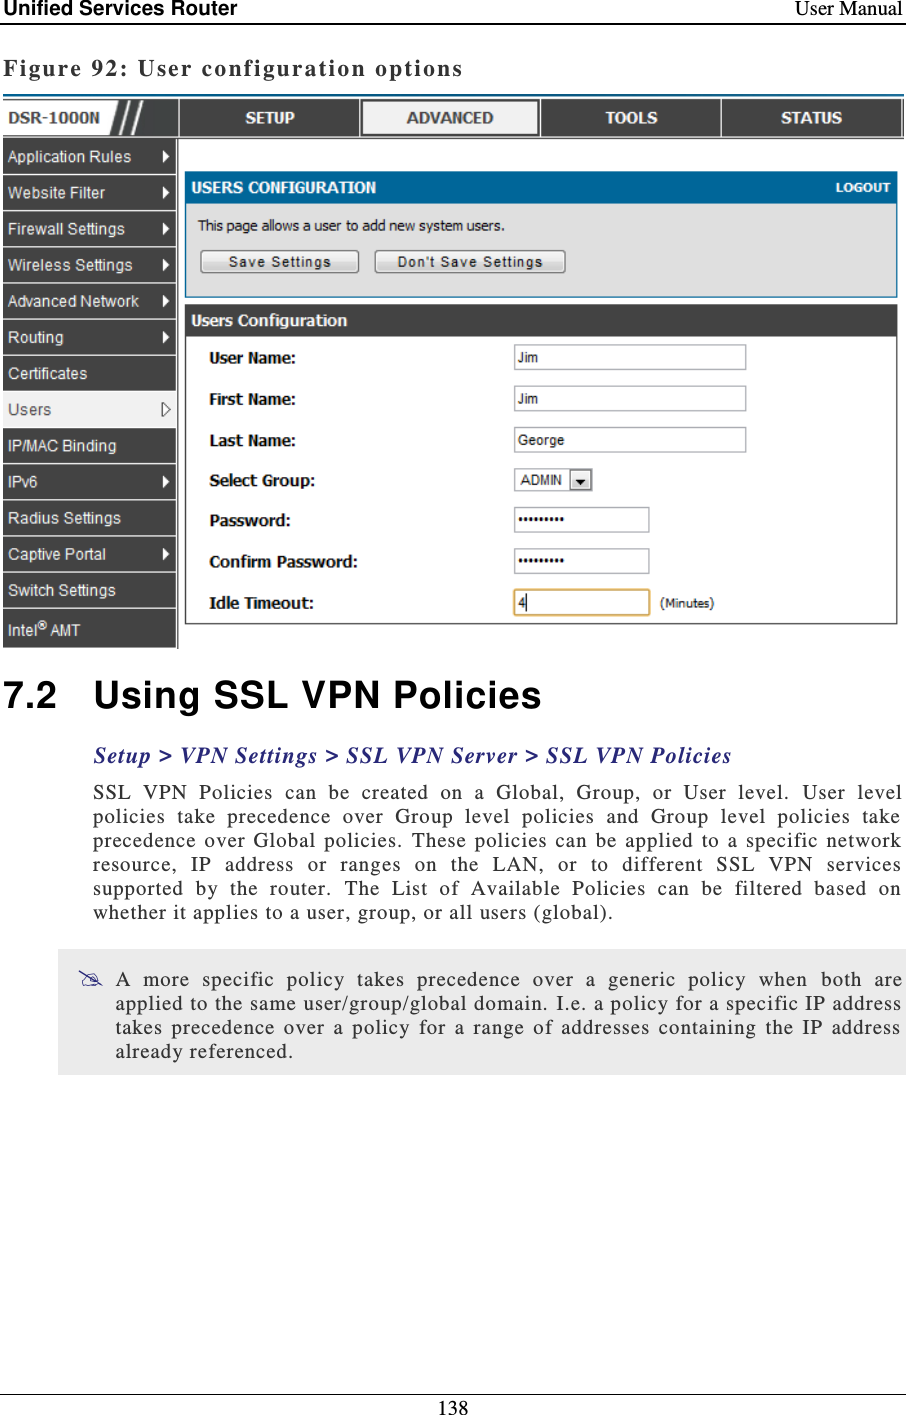 Unified Services Router    User Manual 138  Figure 92: User configuration options   7.2  Using SSL VPN Policies Setup &gt; VPN Settings &gt; SSL VPN Server &gt; SSL VPN Policies   SSL  VPN  Policies  can  be  created  on  a  Global,  Group,  or  User  level.   User  level policies  take  precedence  over  Group  level  policies  and  Group  level  policies  take precedence  over  Global  policies.  These  policies  can  be  applied  to  a  specific  network resource,  IP  address  or  ranges  on  the  LAN,  or  to  different  SSL  VPN  services supported  by  the  router.   The  List  of  Available  Policies  can  be  filtered  based  on whether it applies to a user, group, or all users (global).   A  more  specific  policy  takes  precedence  over  a  generic  policy  when   both  are applied to the same user/group/global domain.  I.e. a policy for a specific IP address takes  precedence  over  a  policy  for  a  range  of  addresses  containing  the  IP  address already referenced.  